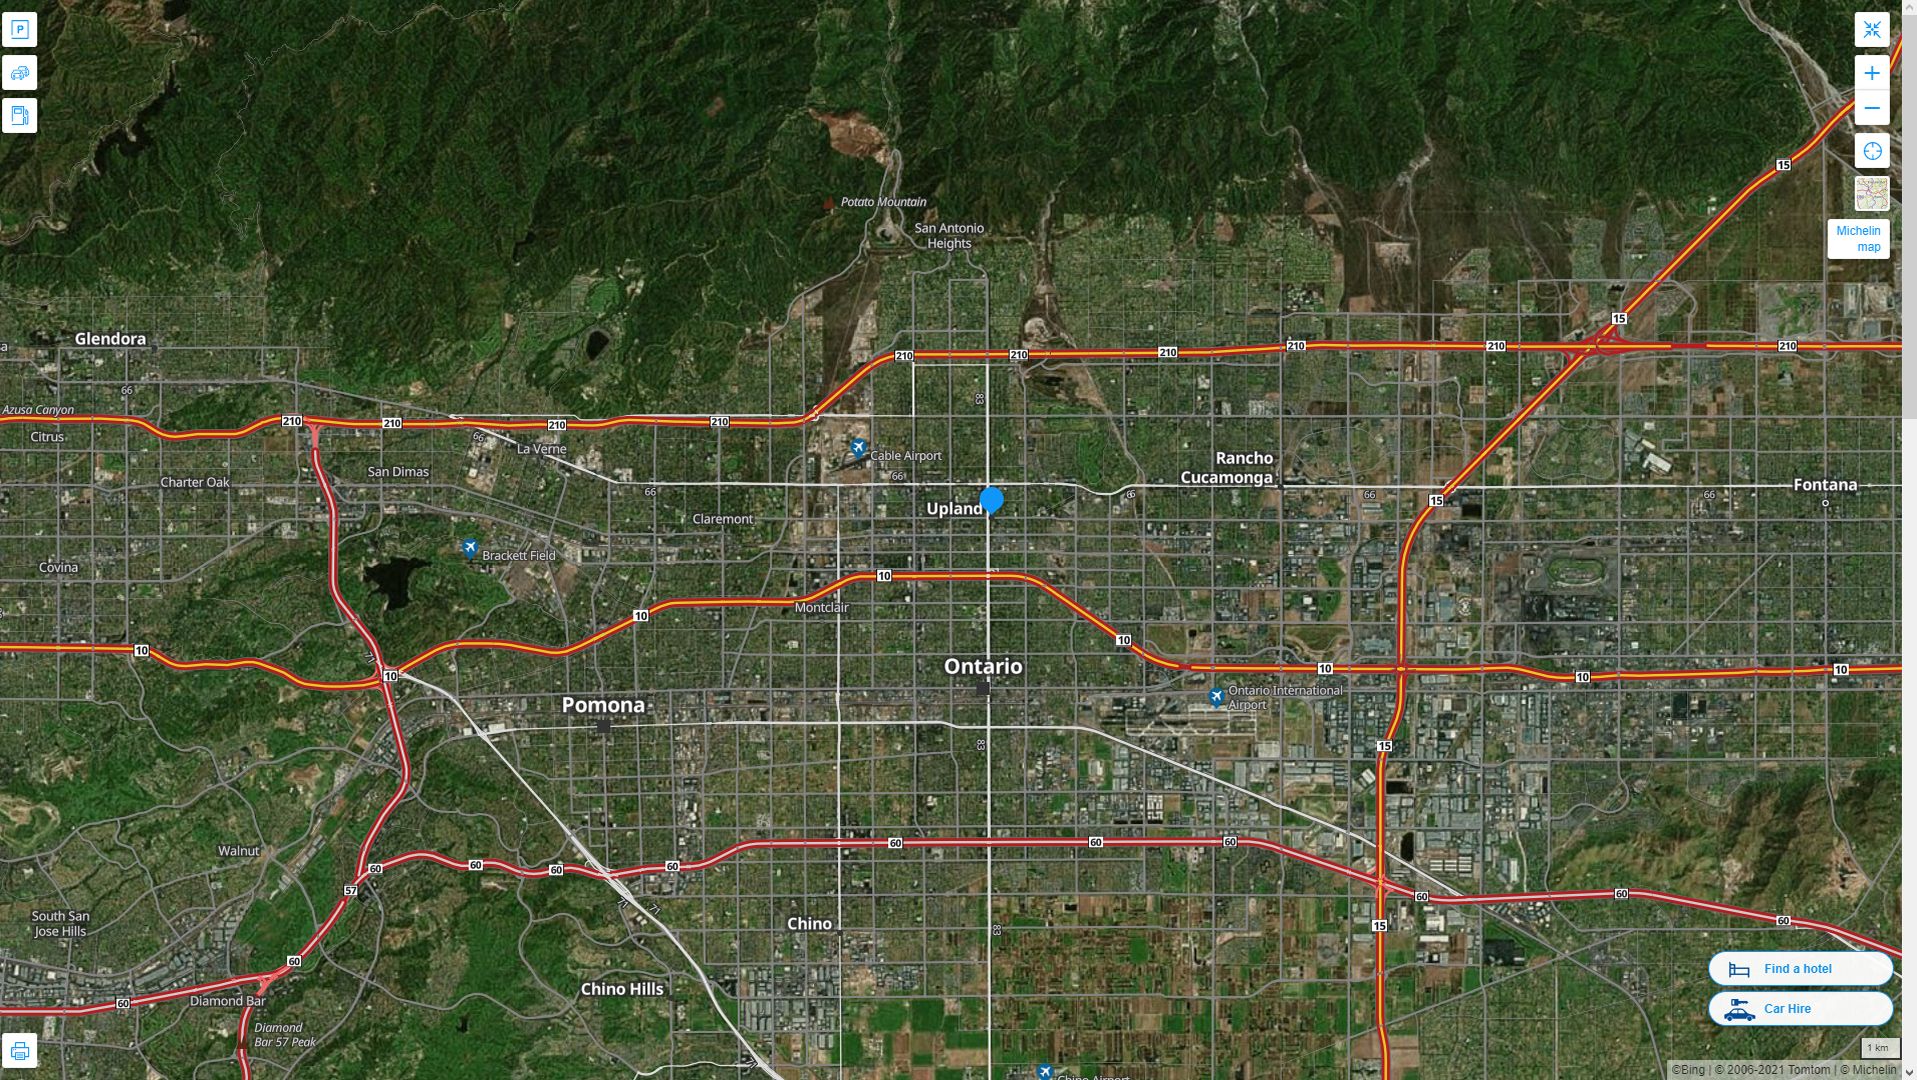 Upland California Highway and Road Map with Satellite View